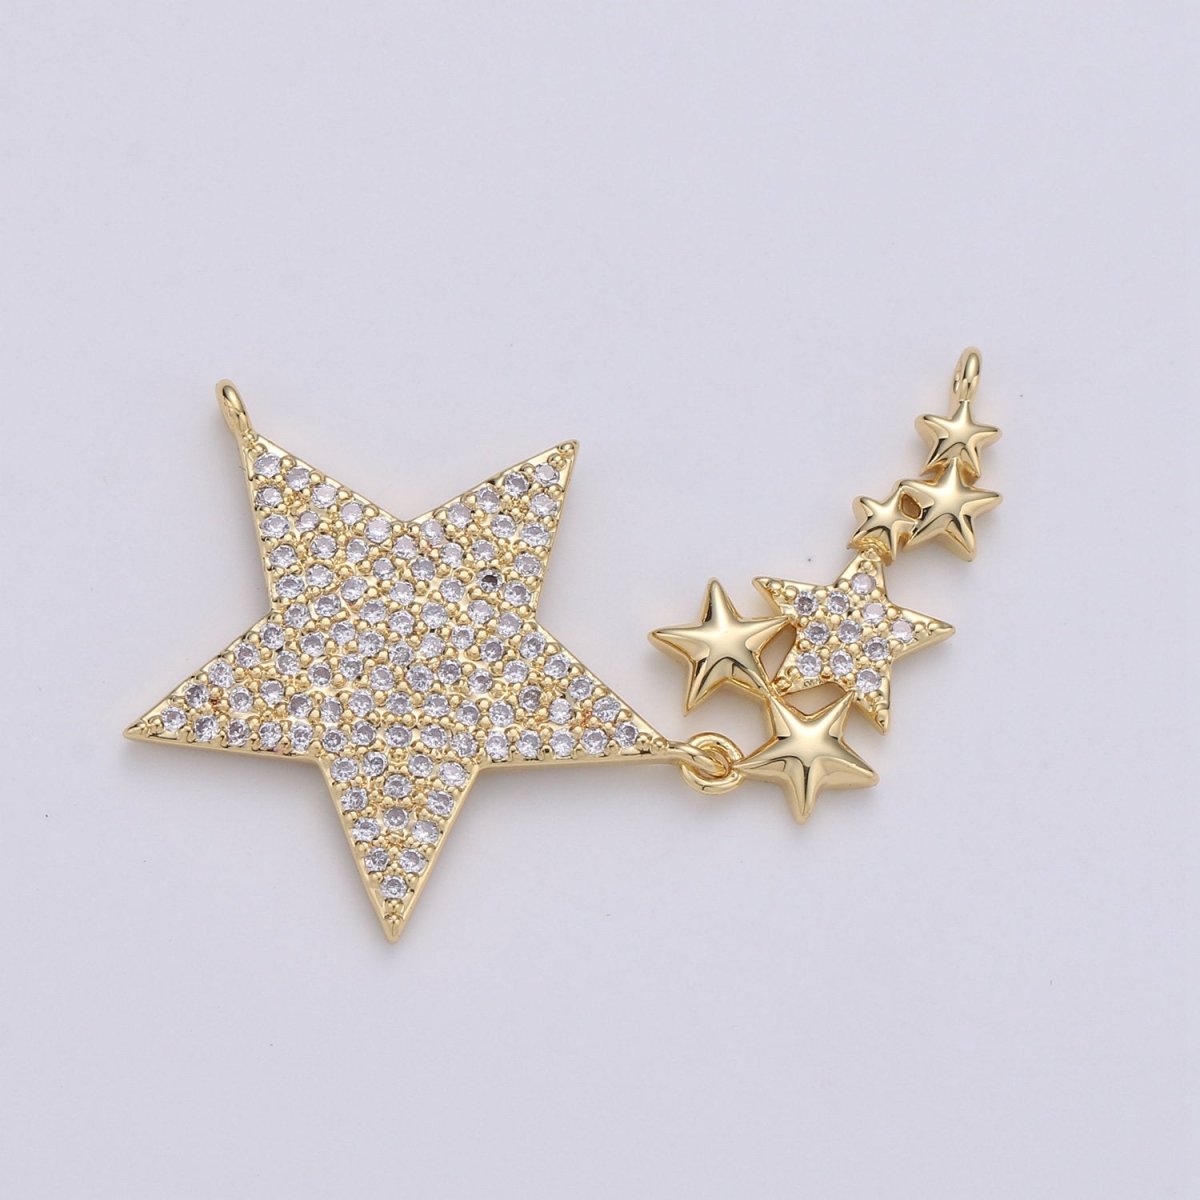 24k Gold Filled Micro Pave Star Charm, Twinkle little Star Pendant Charm, Gold Filled Charm, For DIY Necklace Component F-440 - DLUXCA